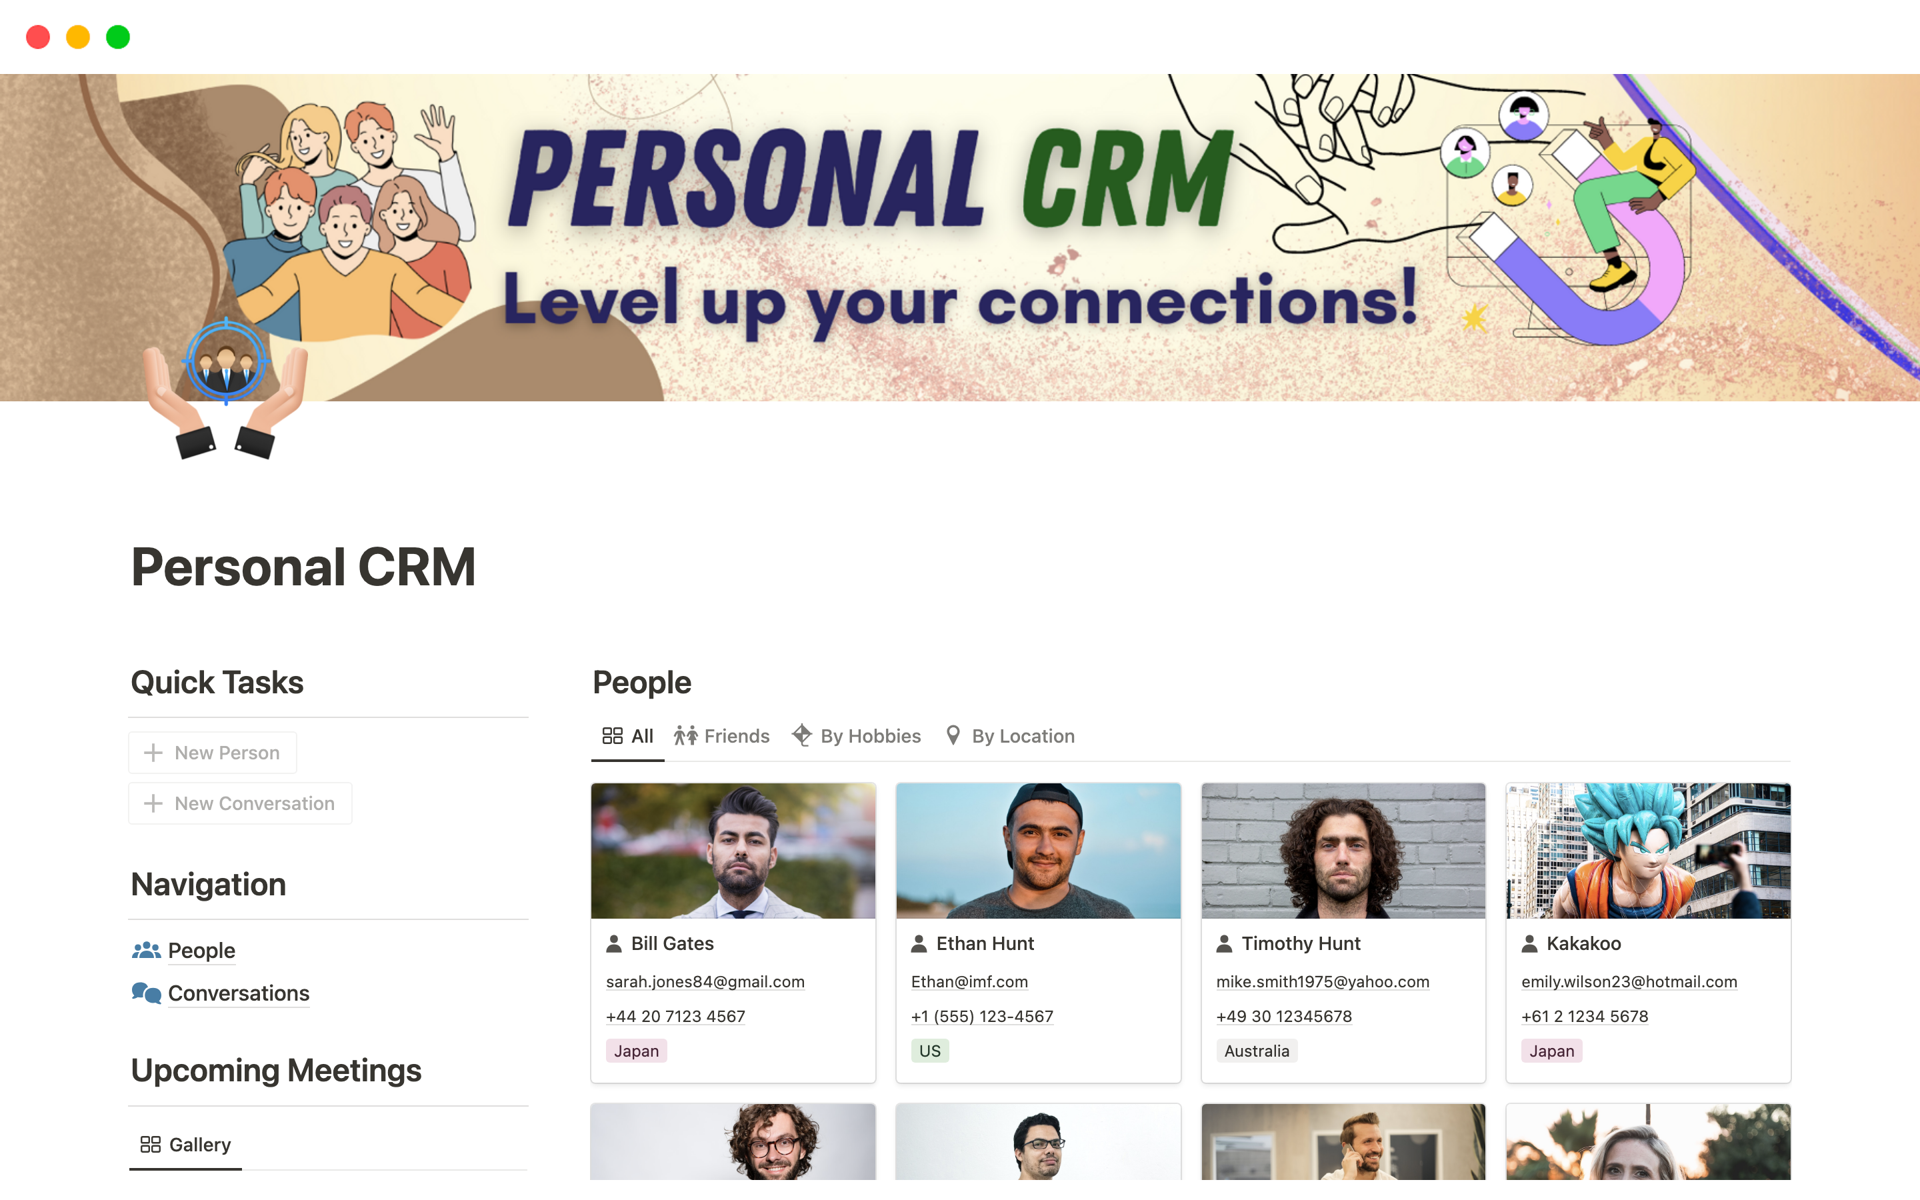 The CRM template empowers you to efficiently track and nurture relationships, streamline communication, and optimize your interactions for success.